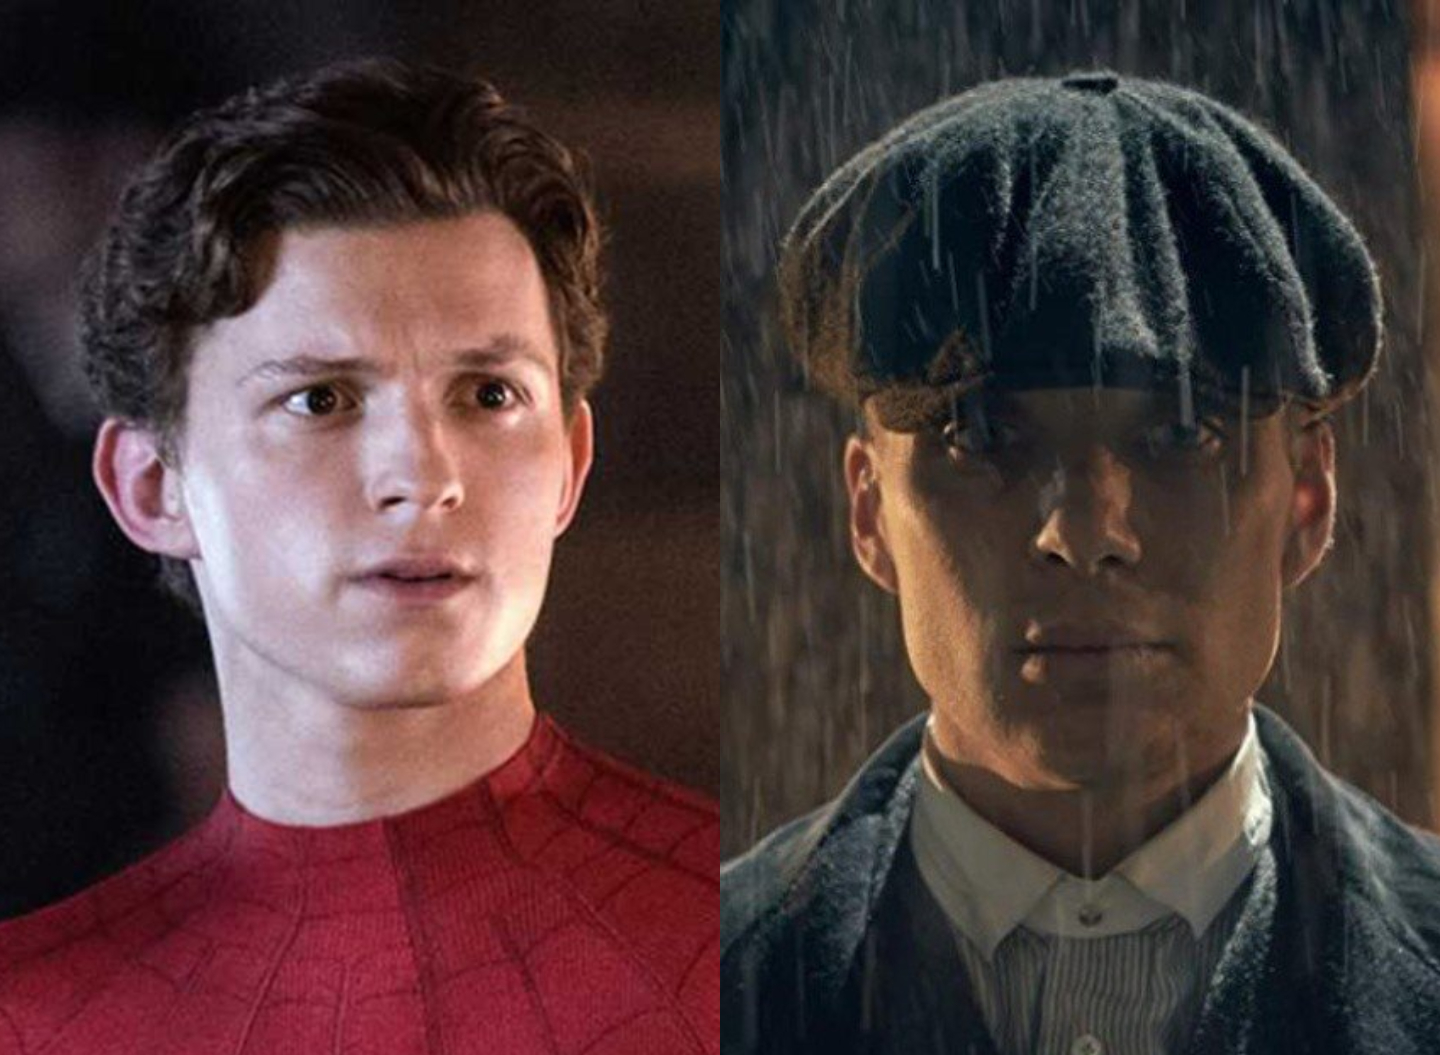 Failed casting for the series, did Tom Holland do well in the movie Peeky Blinders?

